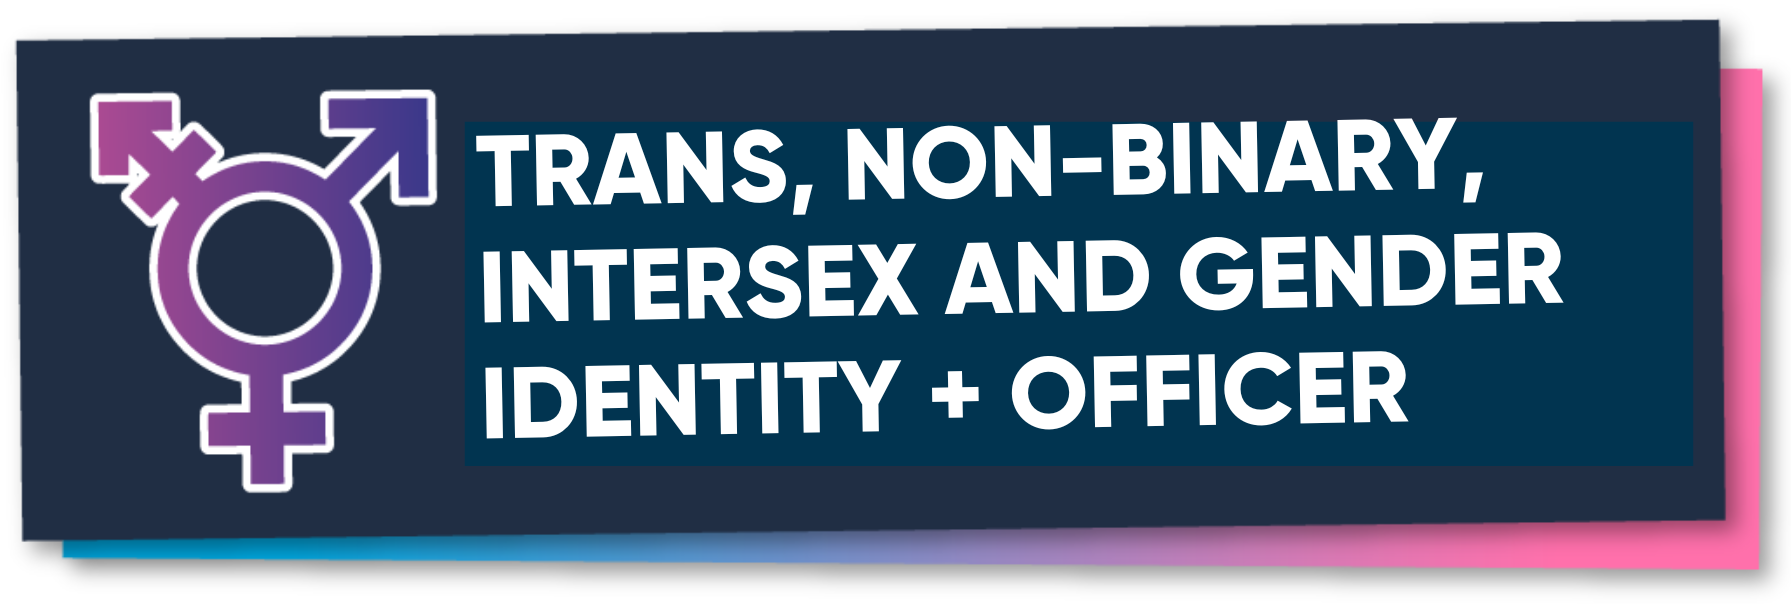 Trans, Non-Binary, Intersex and Gender Identity + Officer Button